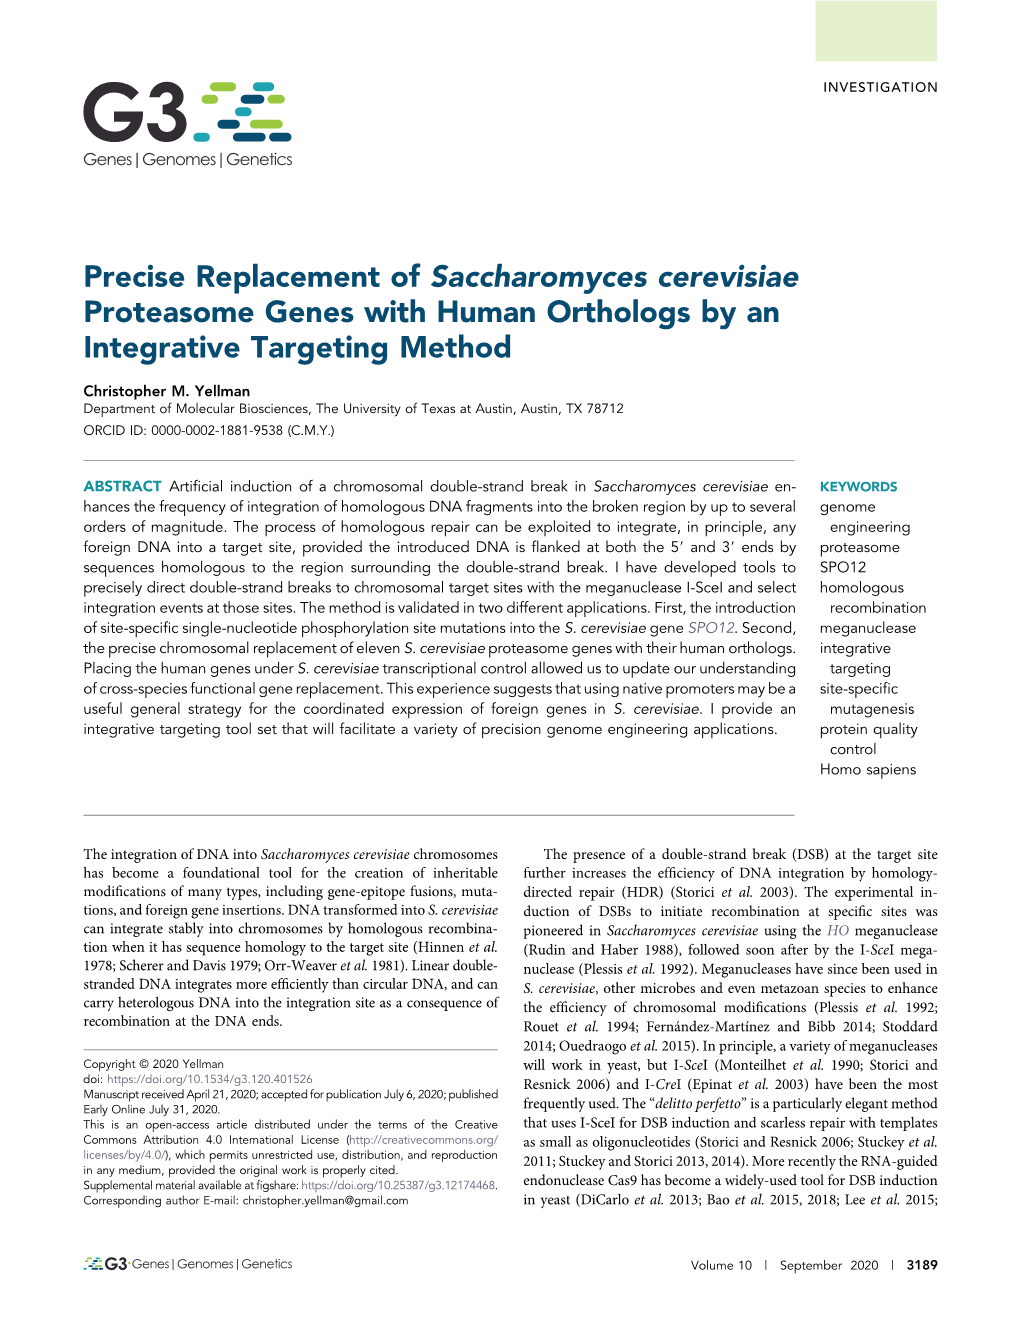 Precise Replacement of Saccharomyces Cerevisiae Proteasome Genes with Human Orthologs by an Integrative Targeting Method